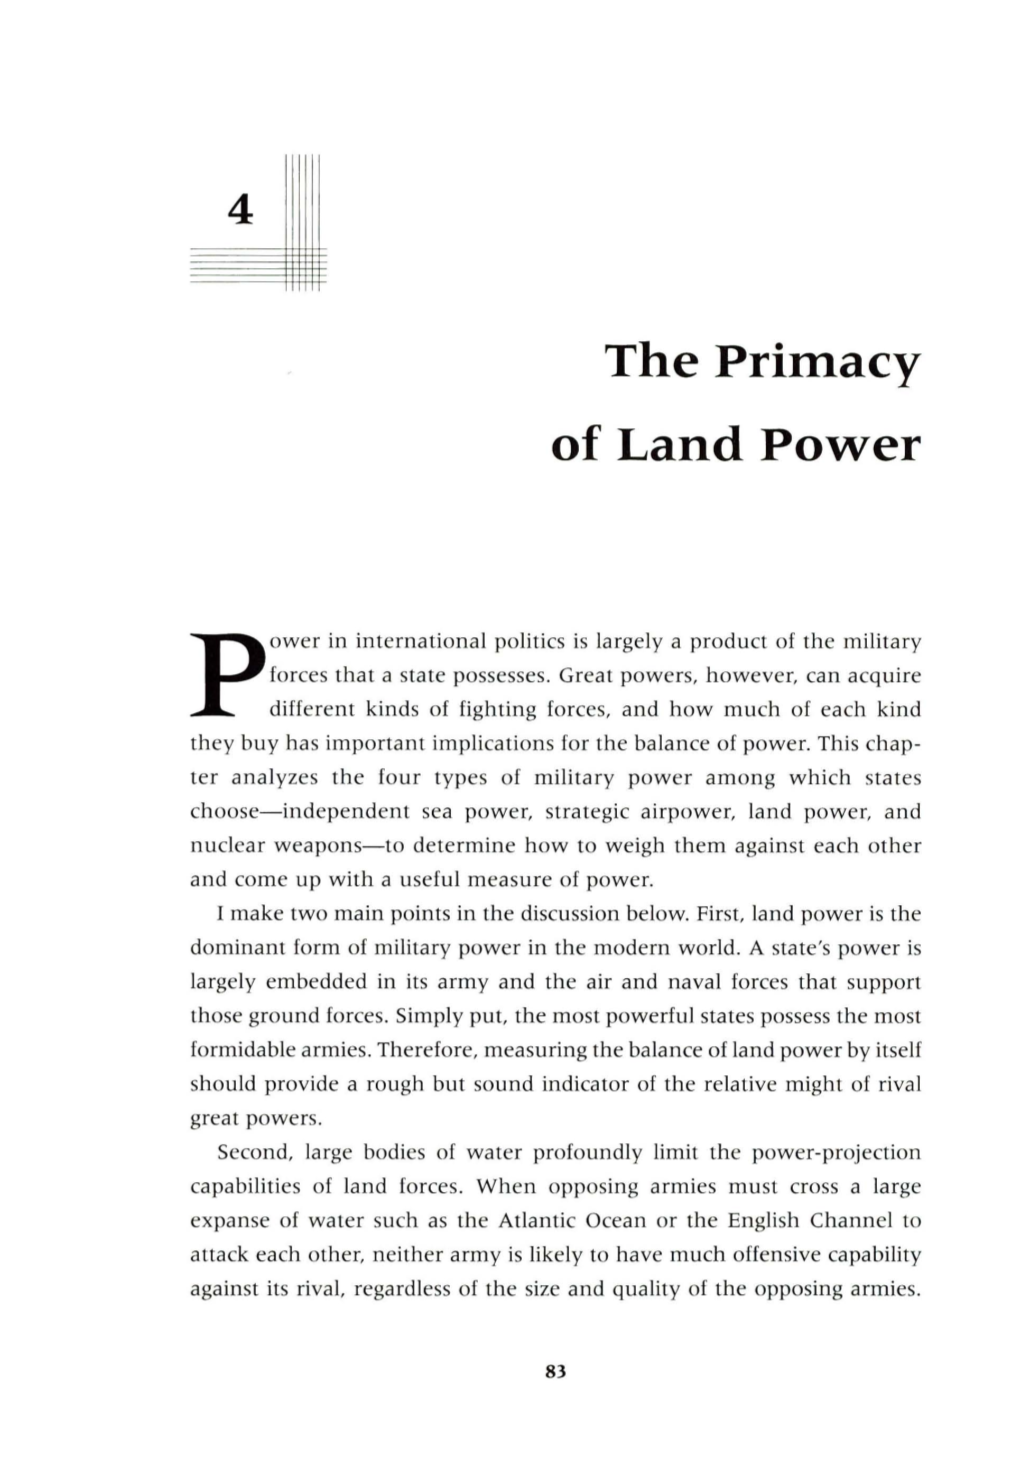 The Primacy of Land Power